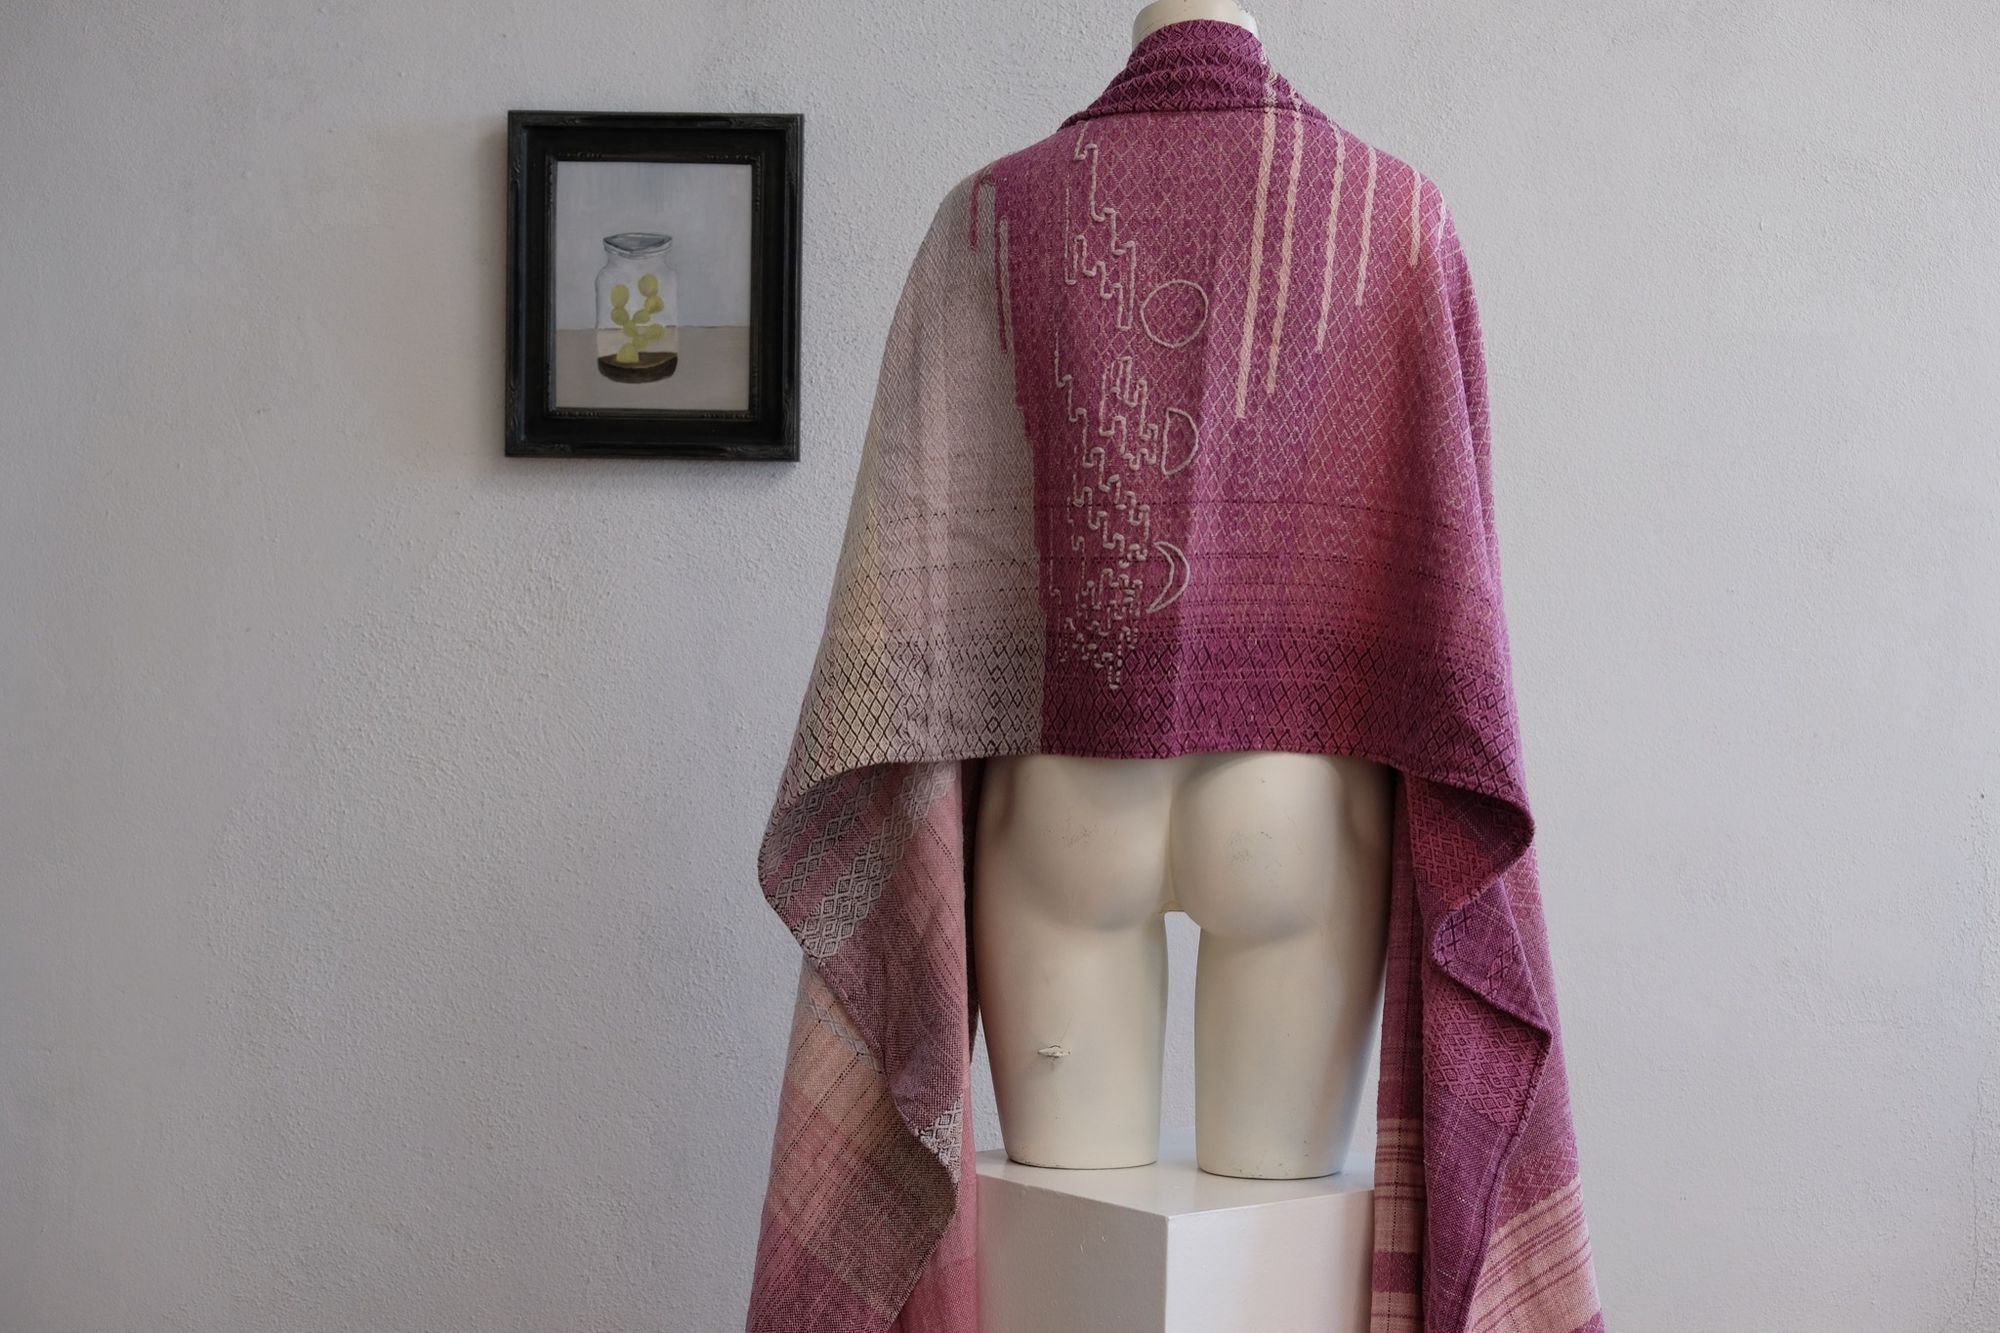 Handwoven fabric lays on a white mannequin in a gallery space. The fabric is naturally dyed with cochineal in all shades of pink and fuchsia with a design of a river and three moons on itHandwoven fabric lays on a wooden floor in a gallery space. The fabric is naturally dyed with cochineal in all shades of pink and fuchsia with a design of a river and three moons on it